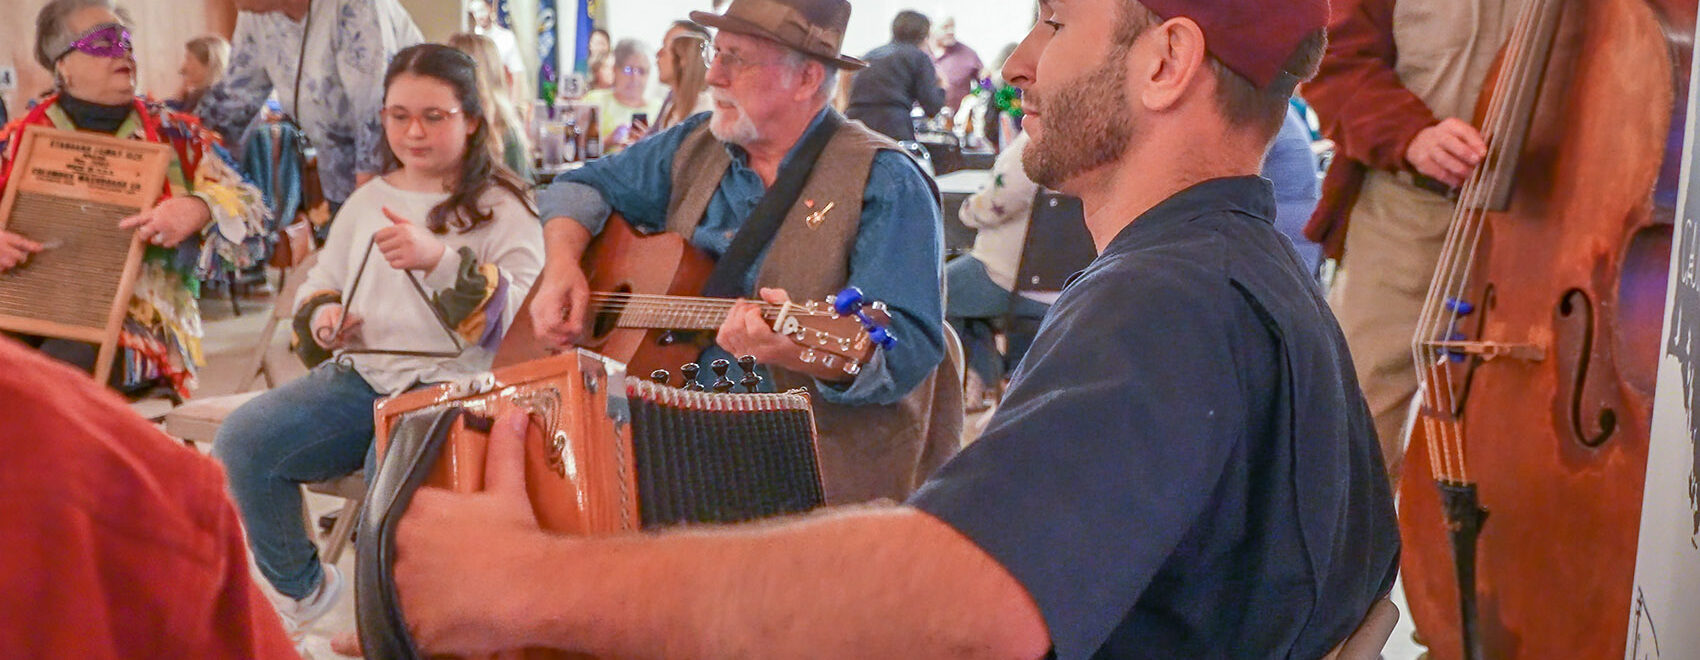 man in blue shirt and red cap playing accordion and man in blue shirt and hat playing guitar at jam session